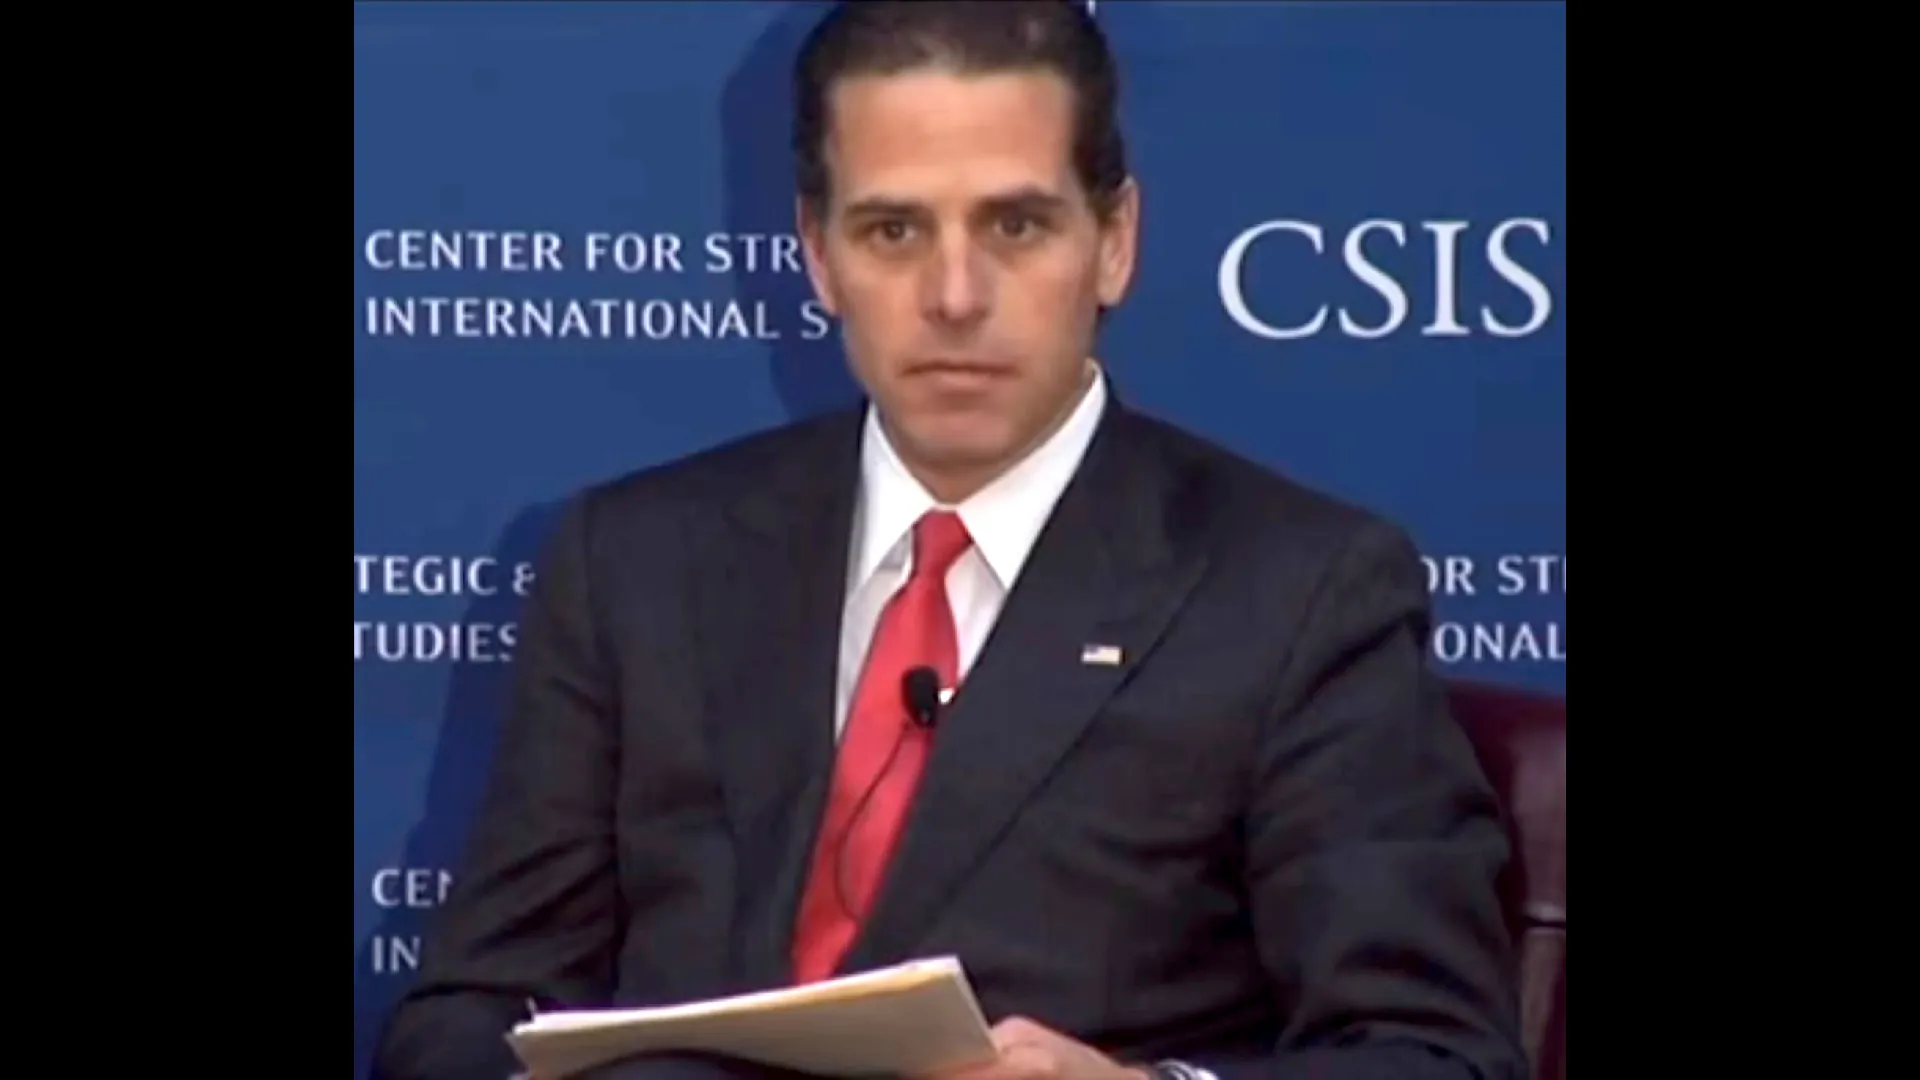 Hunter Biden's Tax Troubles: A Convenient Distraction from Trump's Legal Nightmare